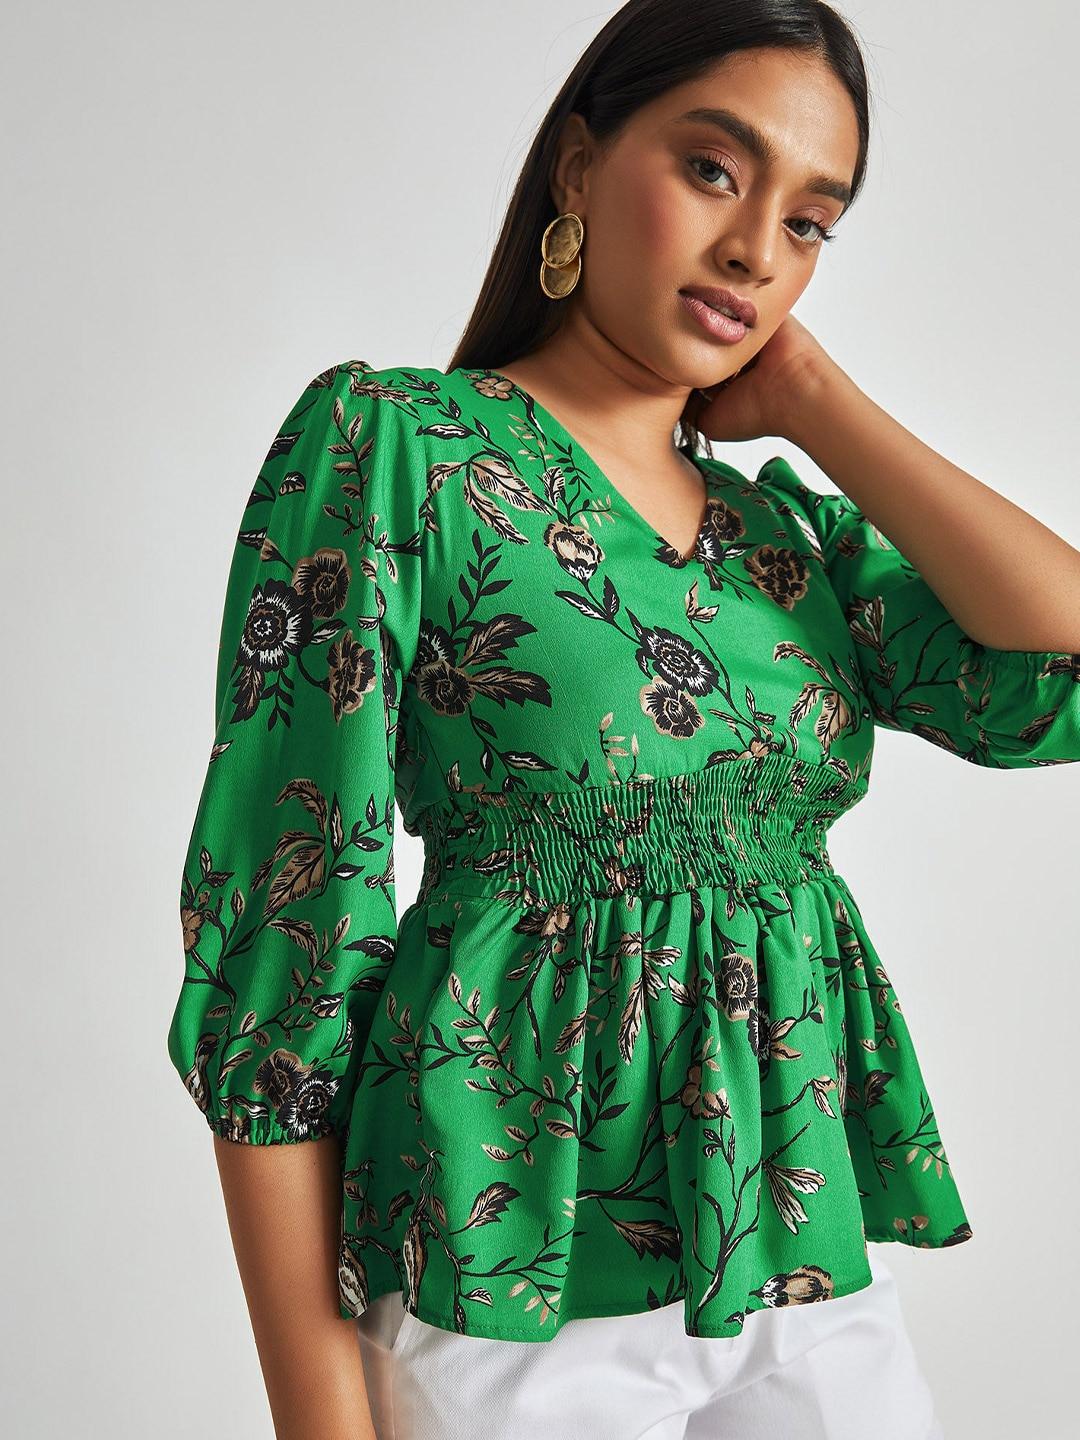 The Label Life Emerald Green Floral Peplum Top